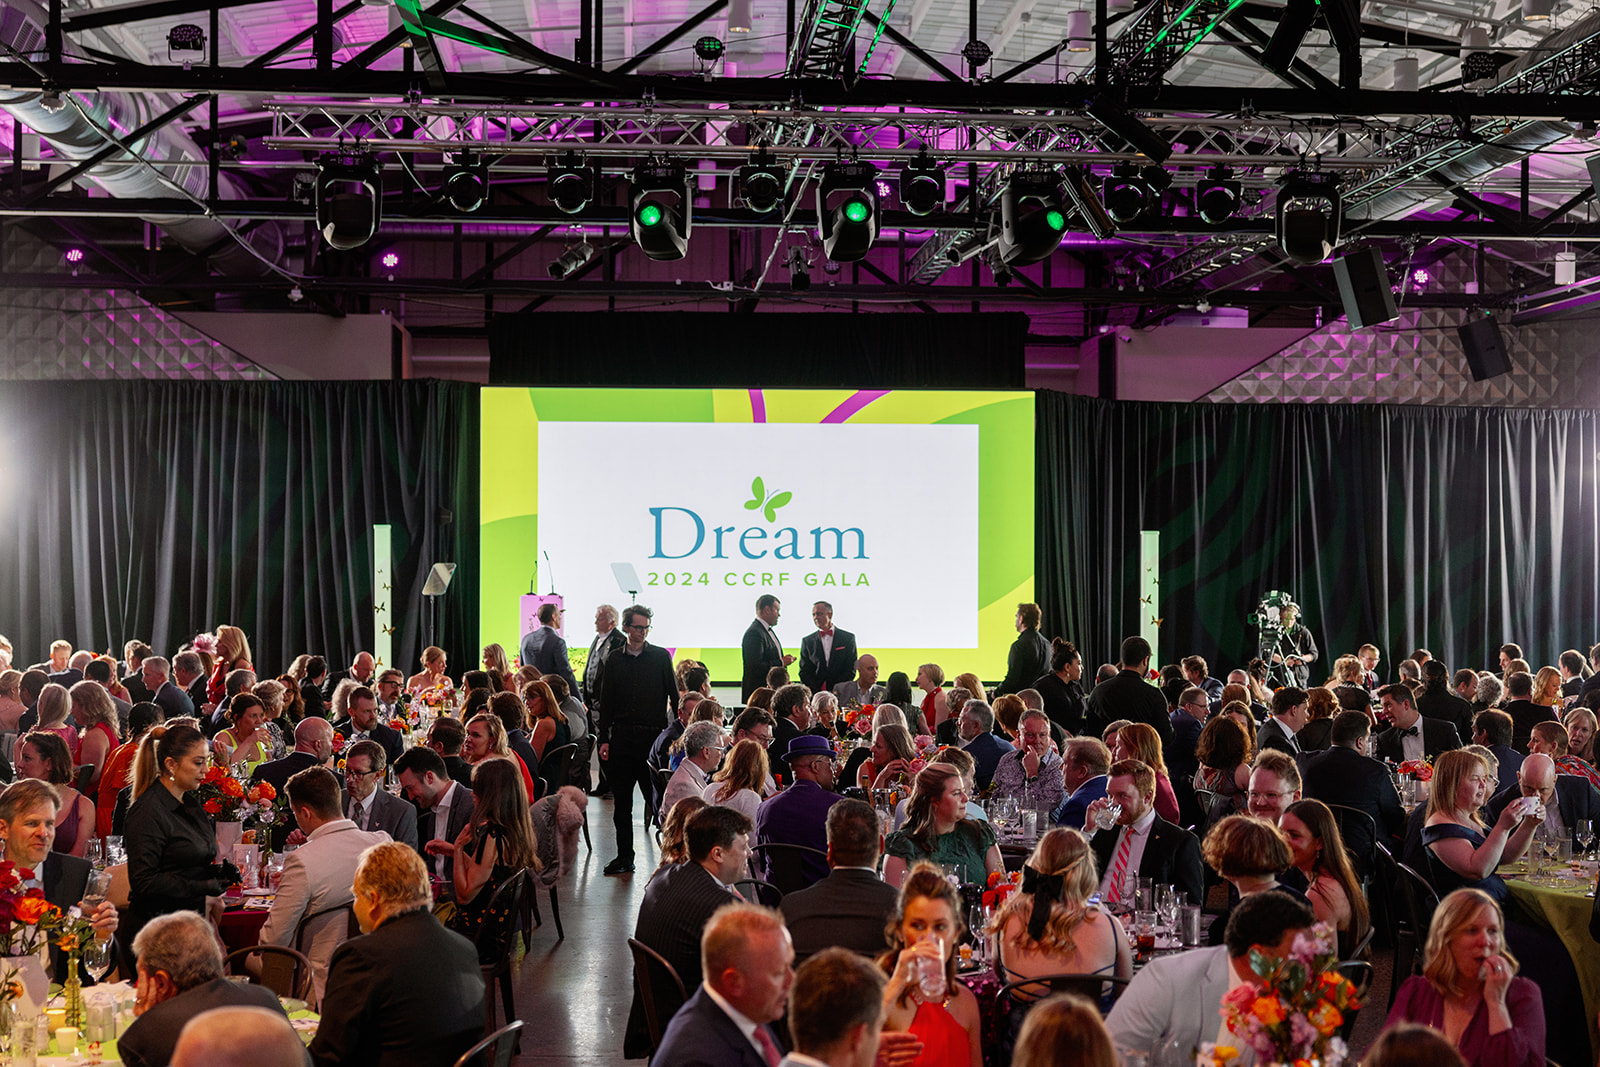 Children’s Cancer Research Fund (CCRF) and the DREAM GALA